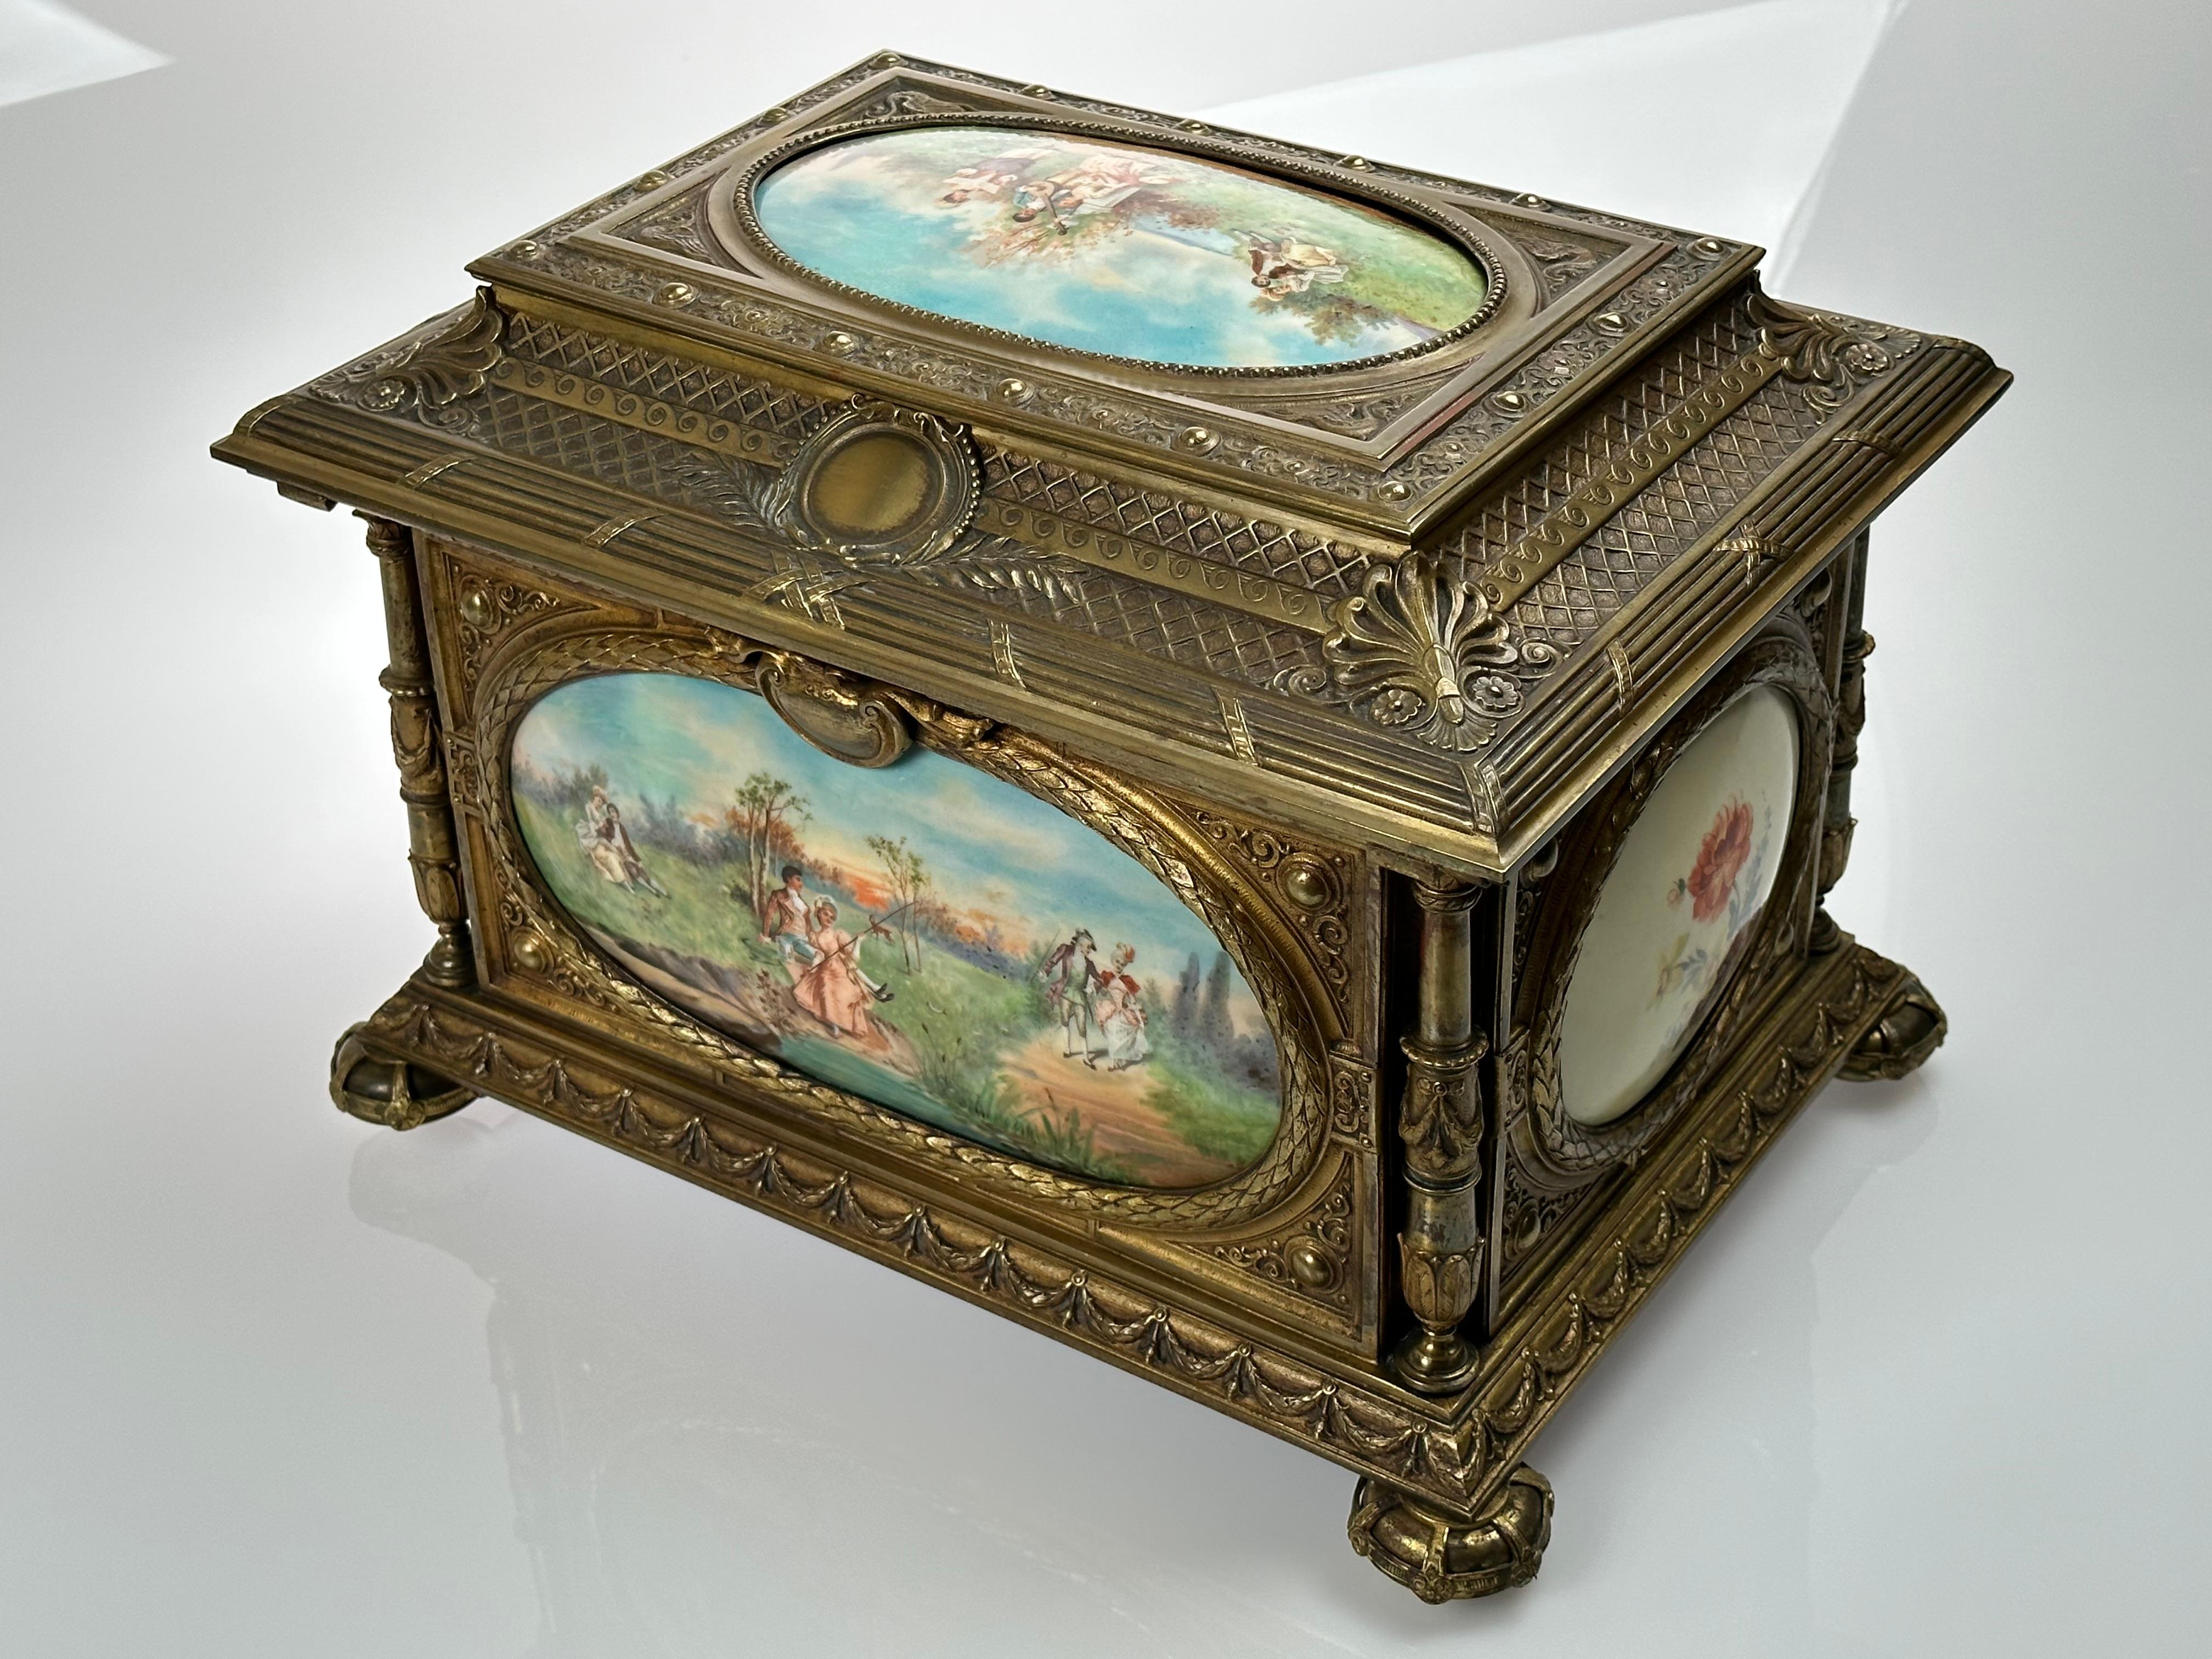 A Large French Antique Sevres Style Porcelain & Gilt Bronze Box Casket In Excellent Condition For Sale In Los Angeles, CA